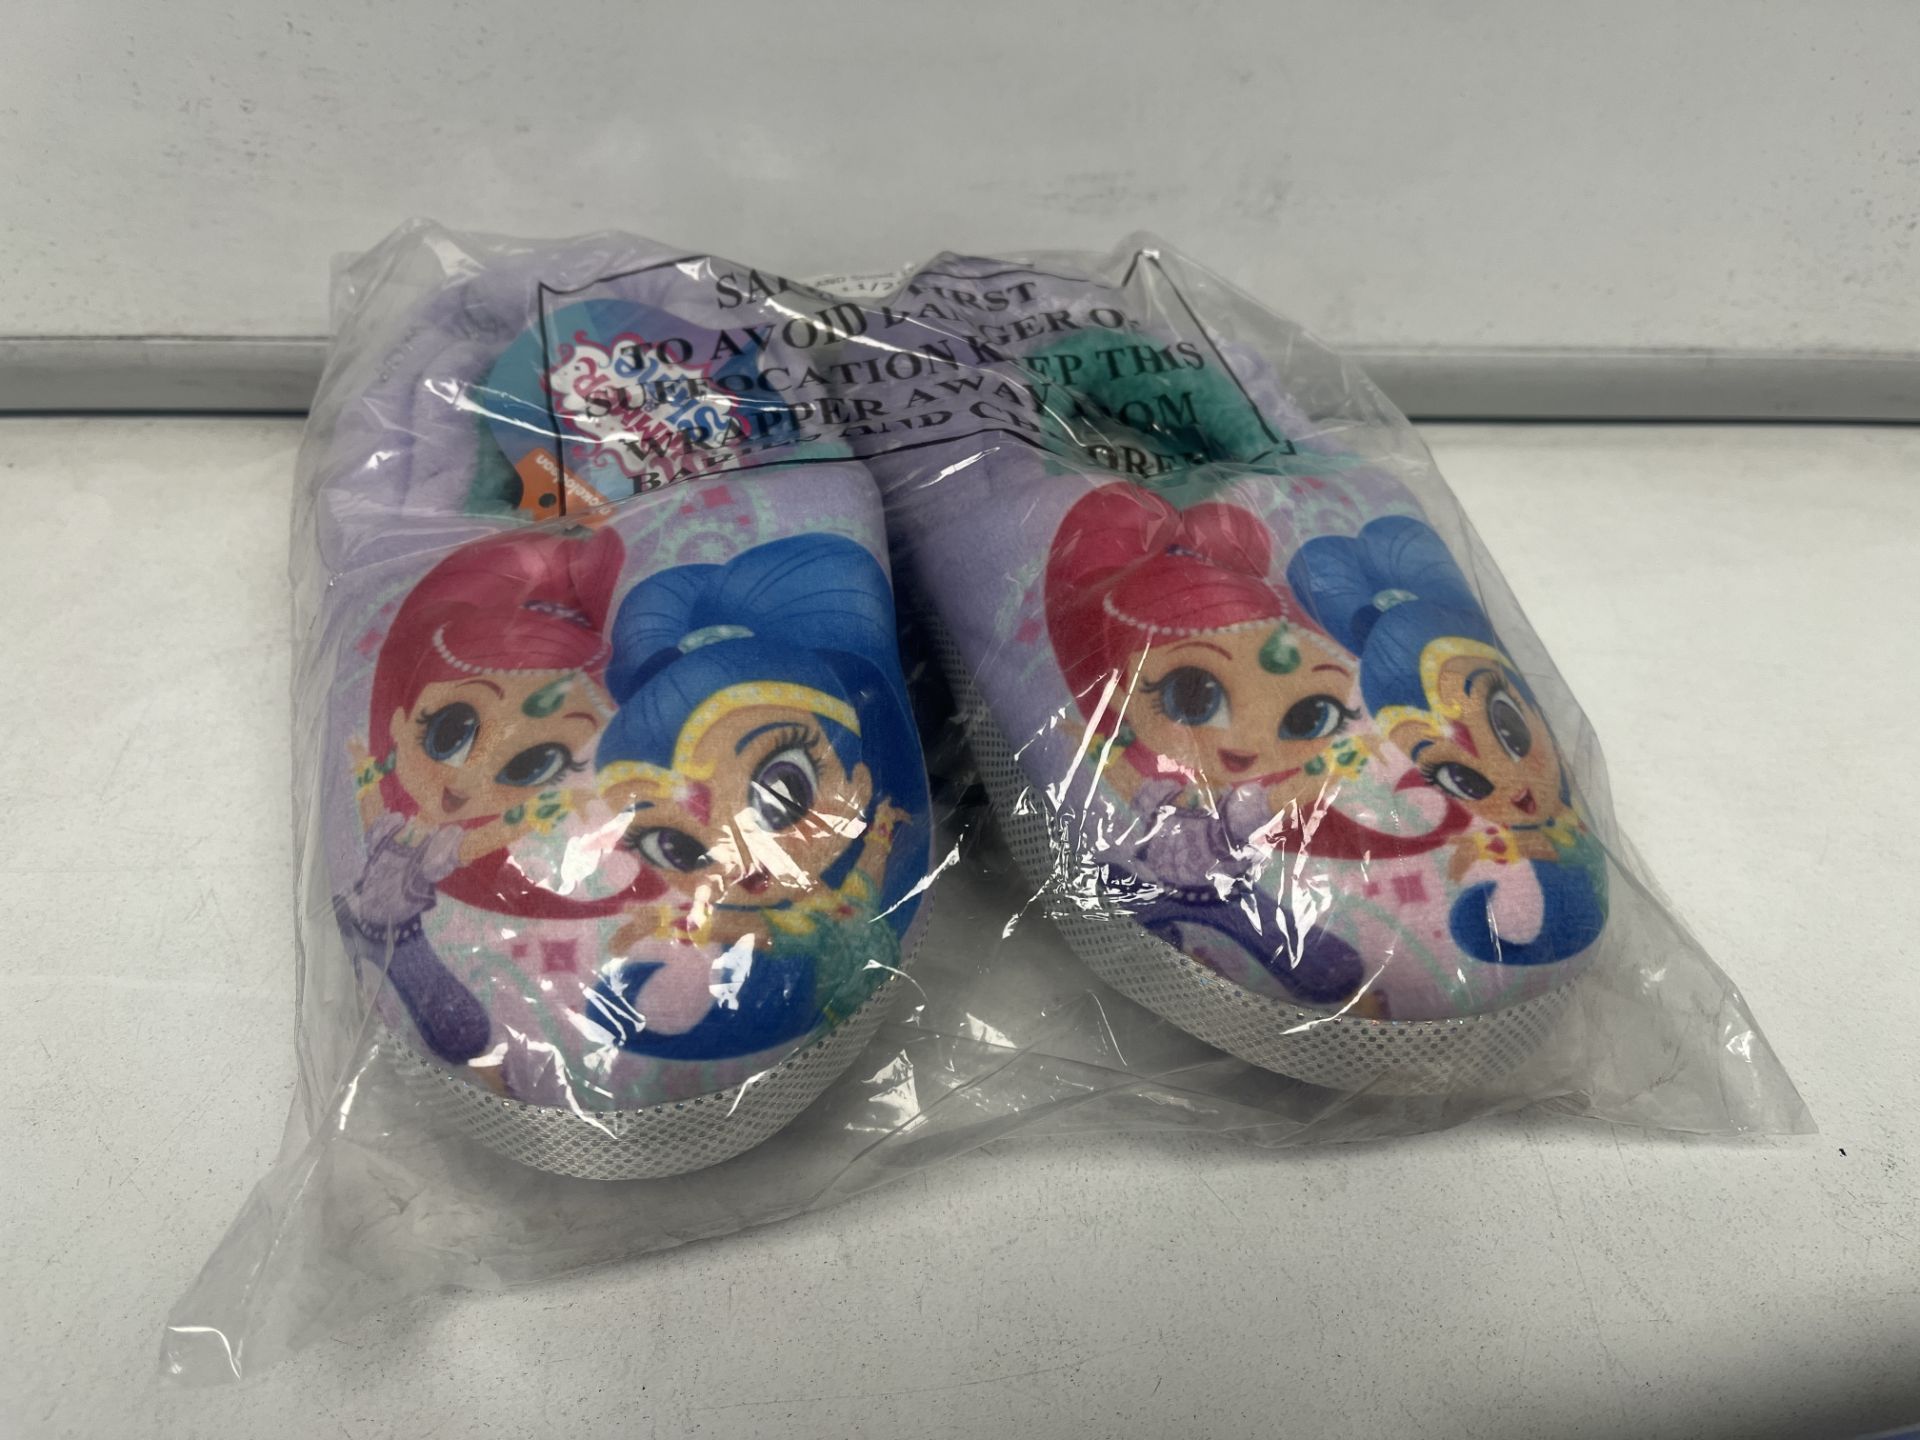 (NO VAT) 20 X BRAND NEW SHIMMER AND SHINE SLIPPERS (SIZES MAY VARY) R9